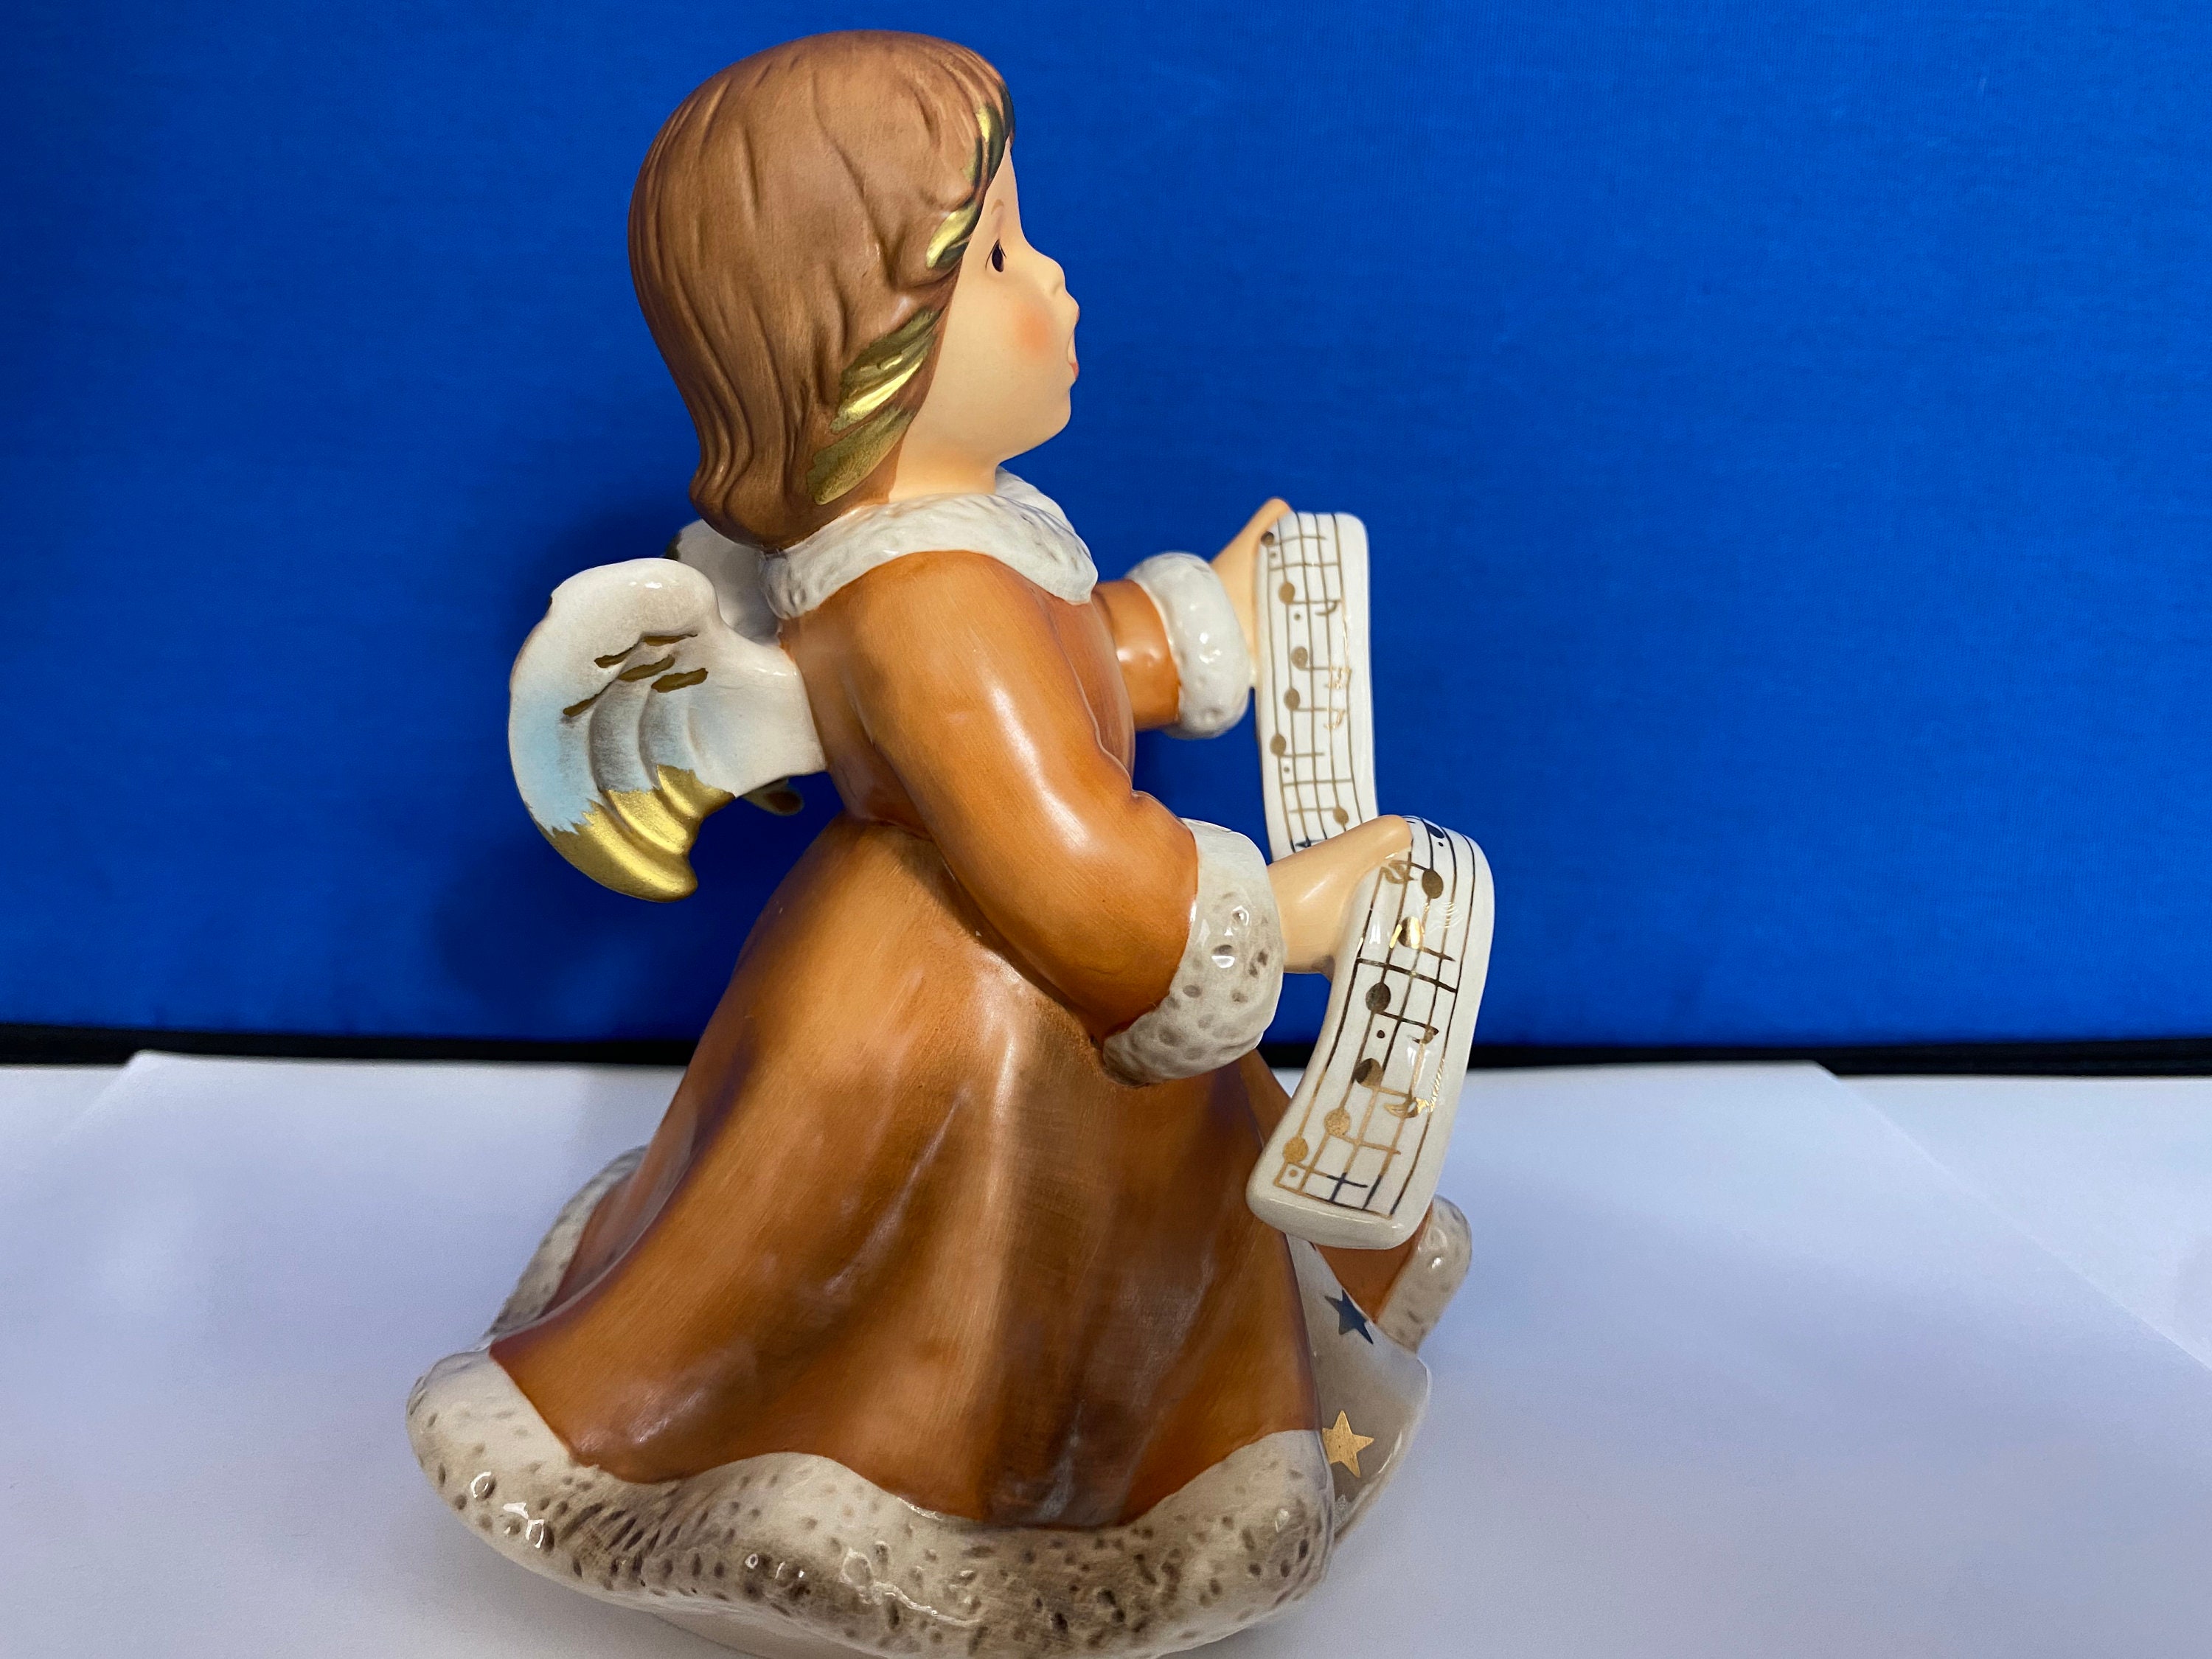 Rare Collectible Vintage Goebel Weihnacht Figurine Christmas Angel Germany Porcelain Near Mid 20th Century Orange Robe Musical Notes